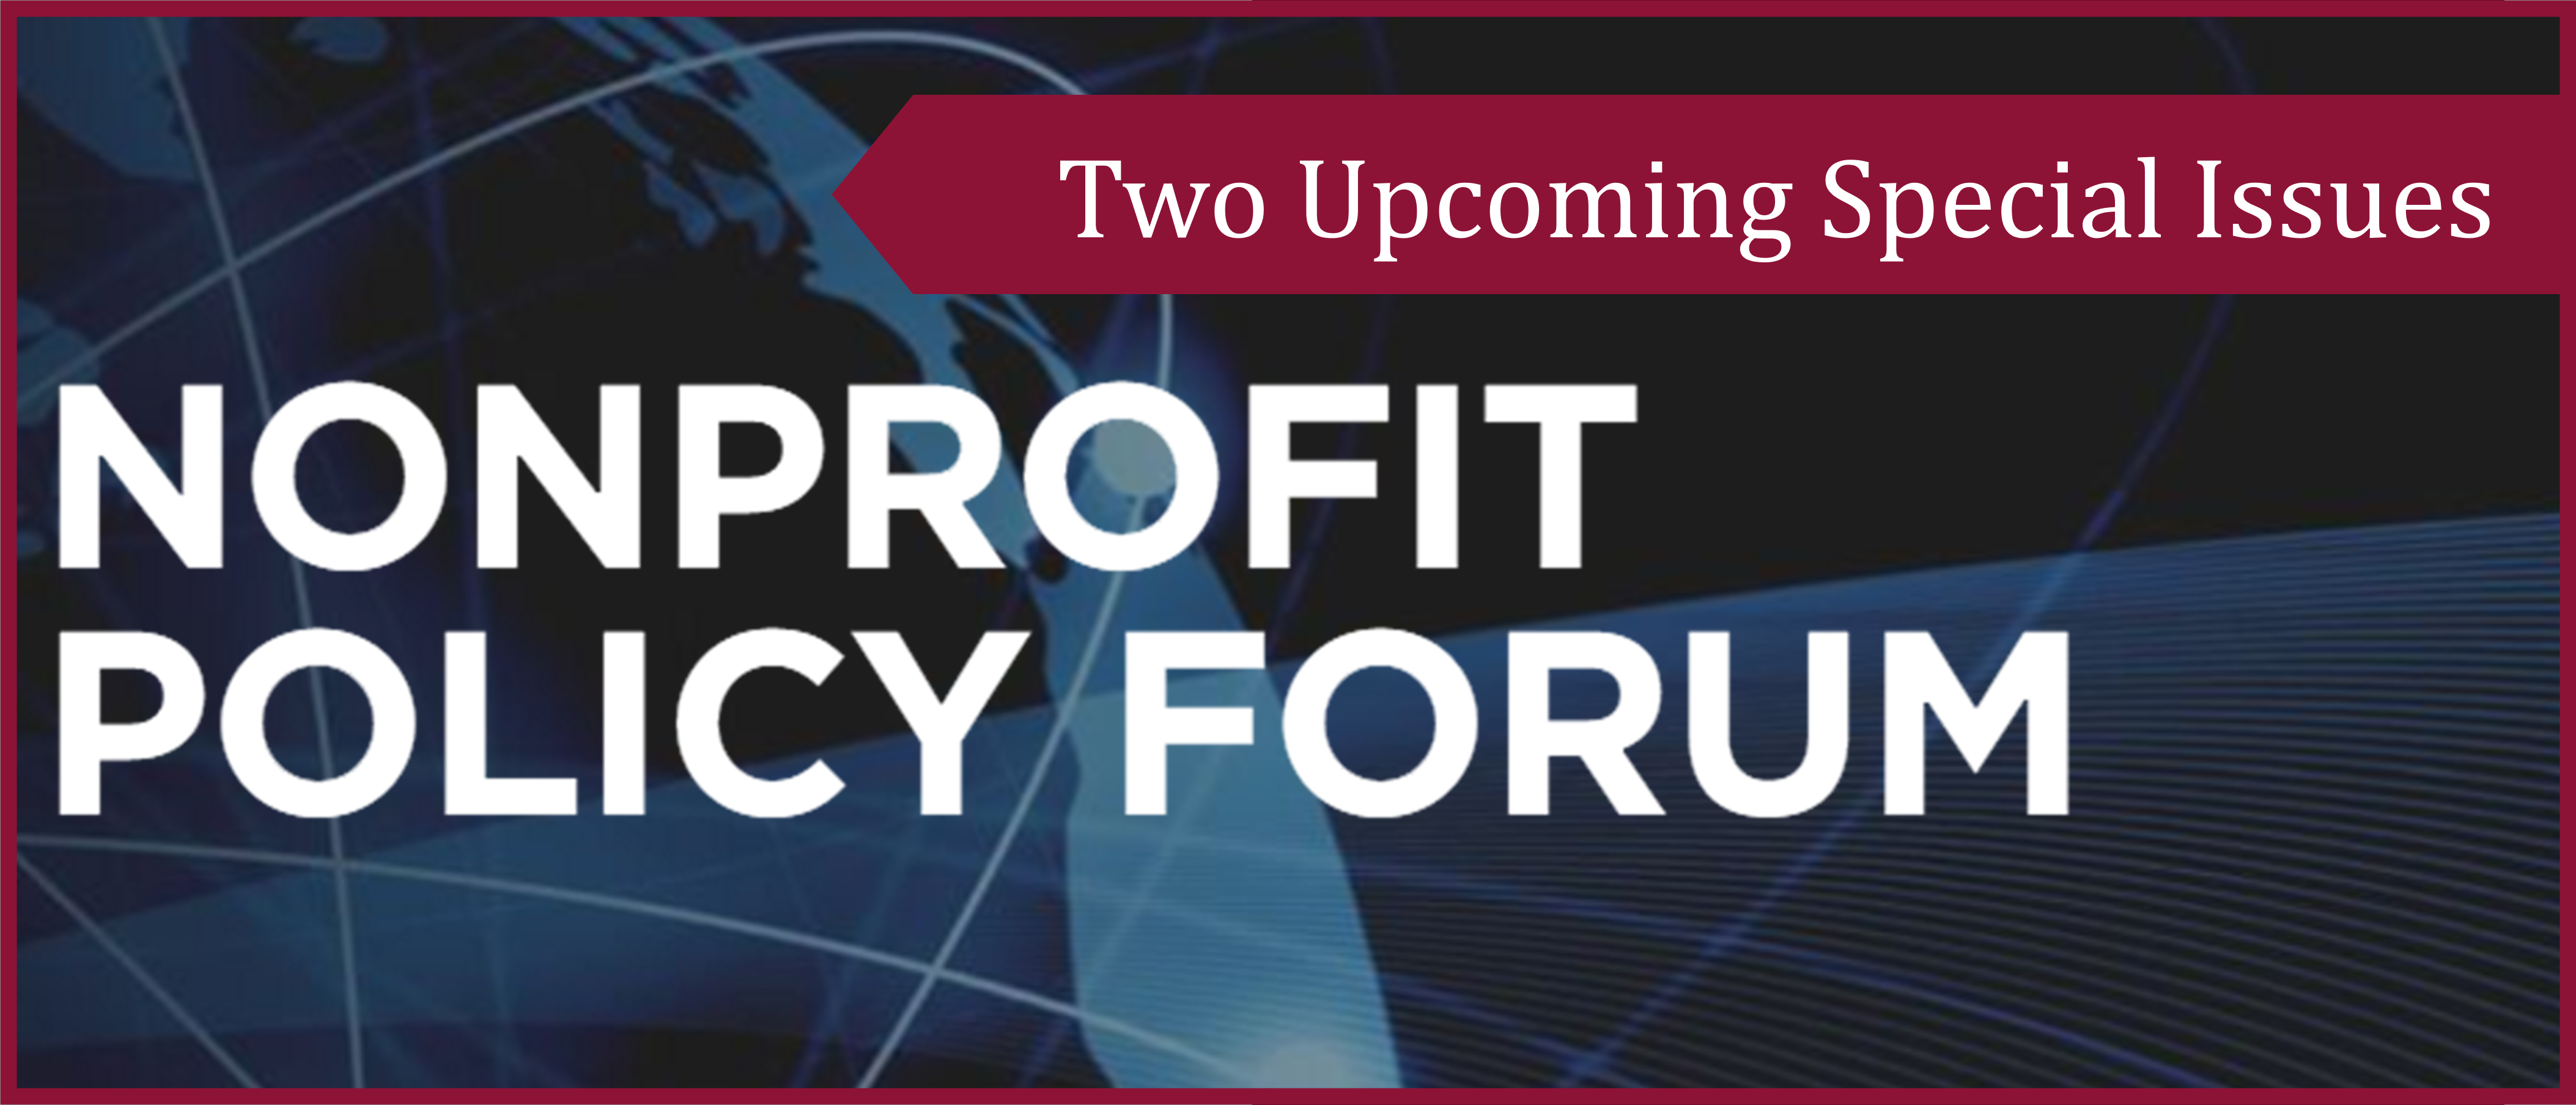 Nonprofit Policy Forum invites papers for two upcoming special issues